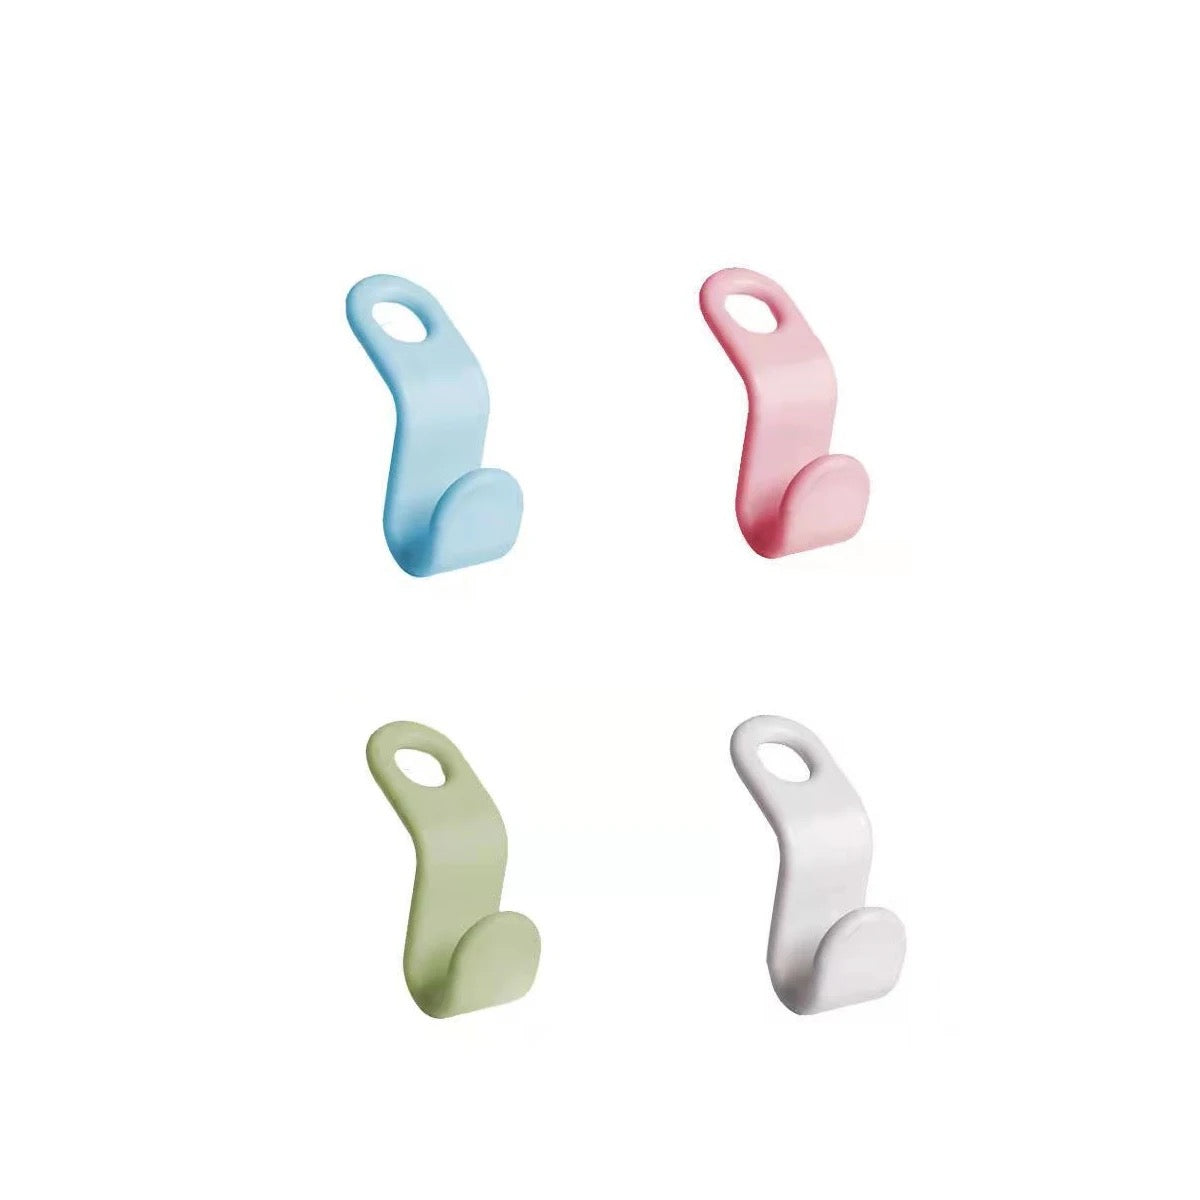 Clothes Hanger Connector Clips in multiple colors